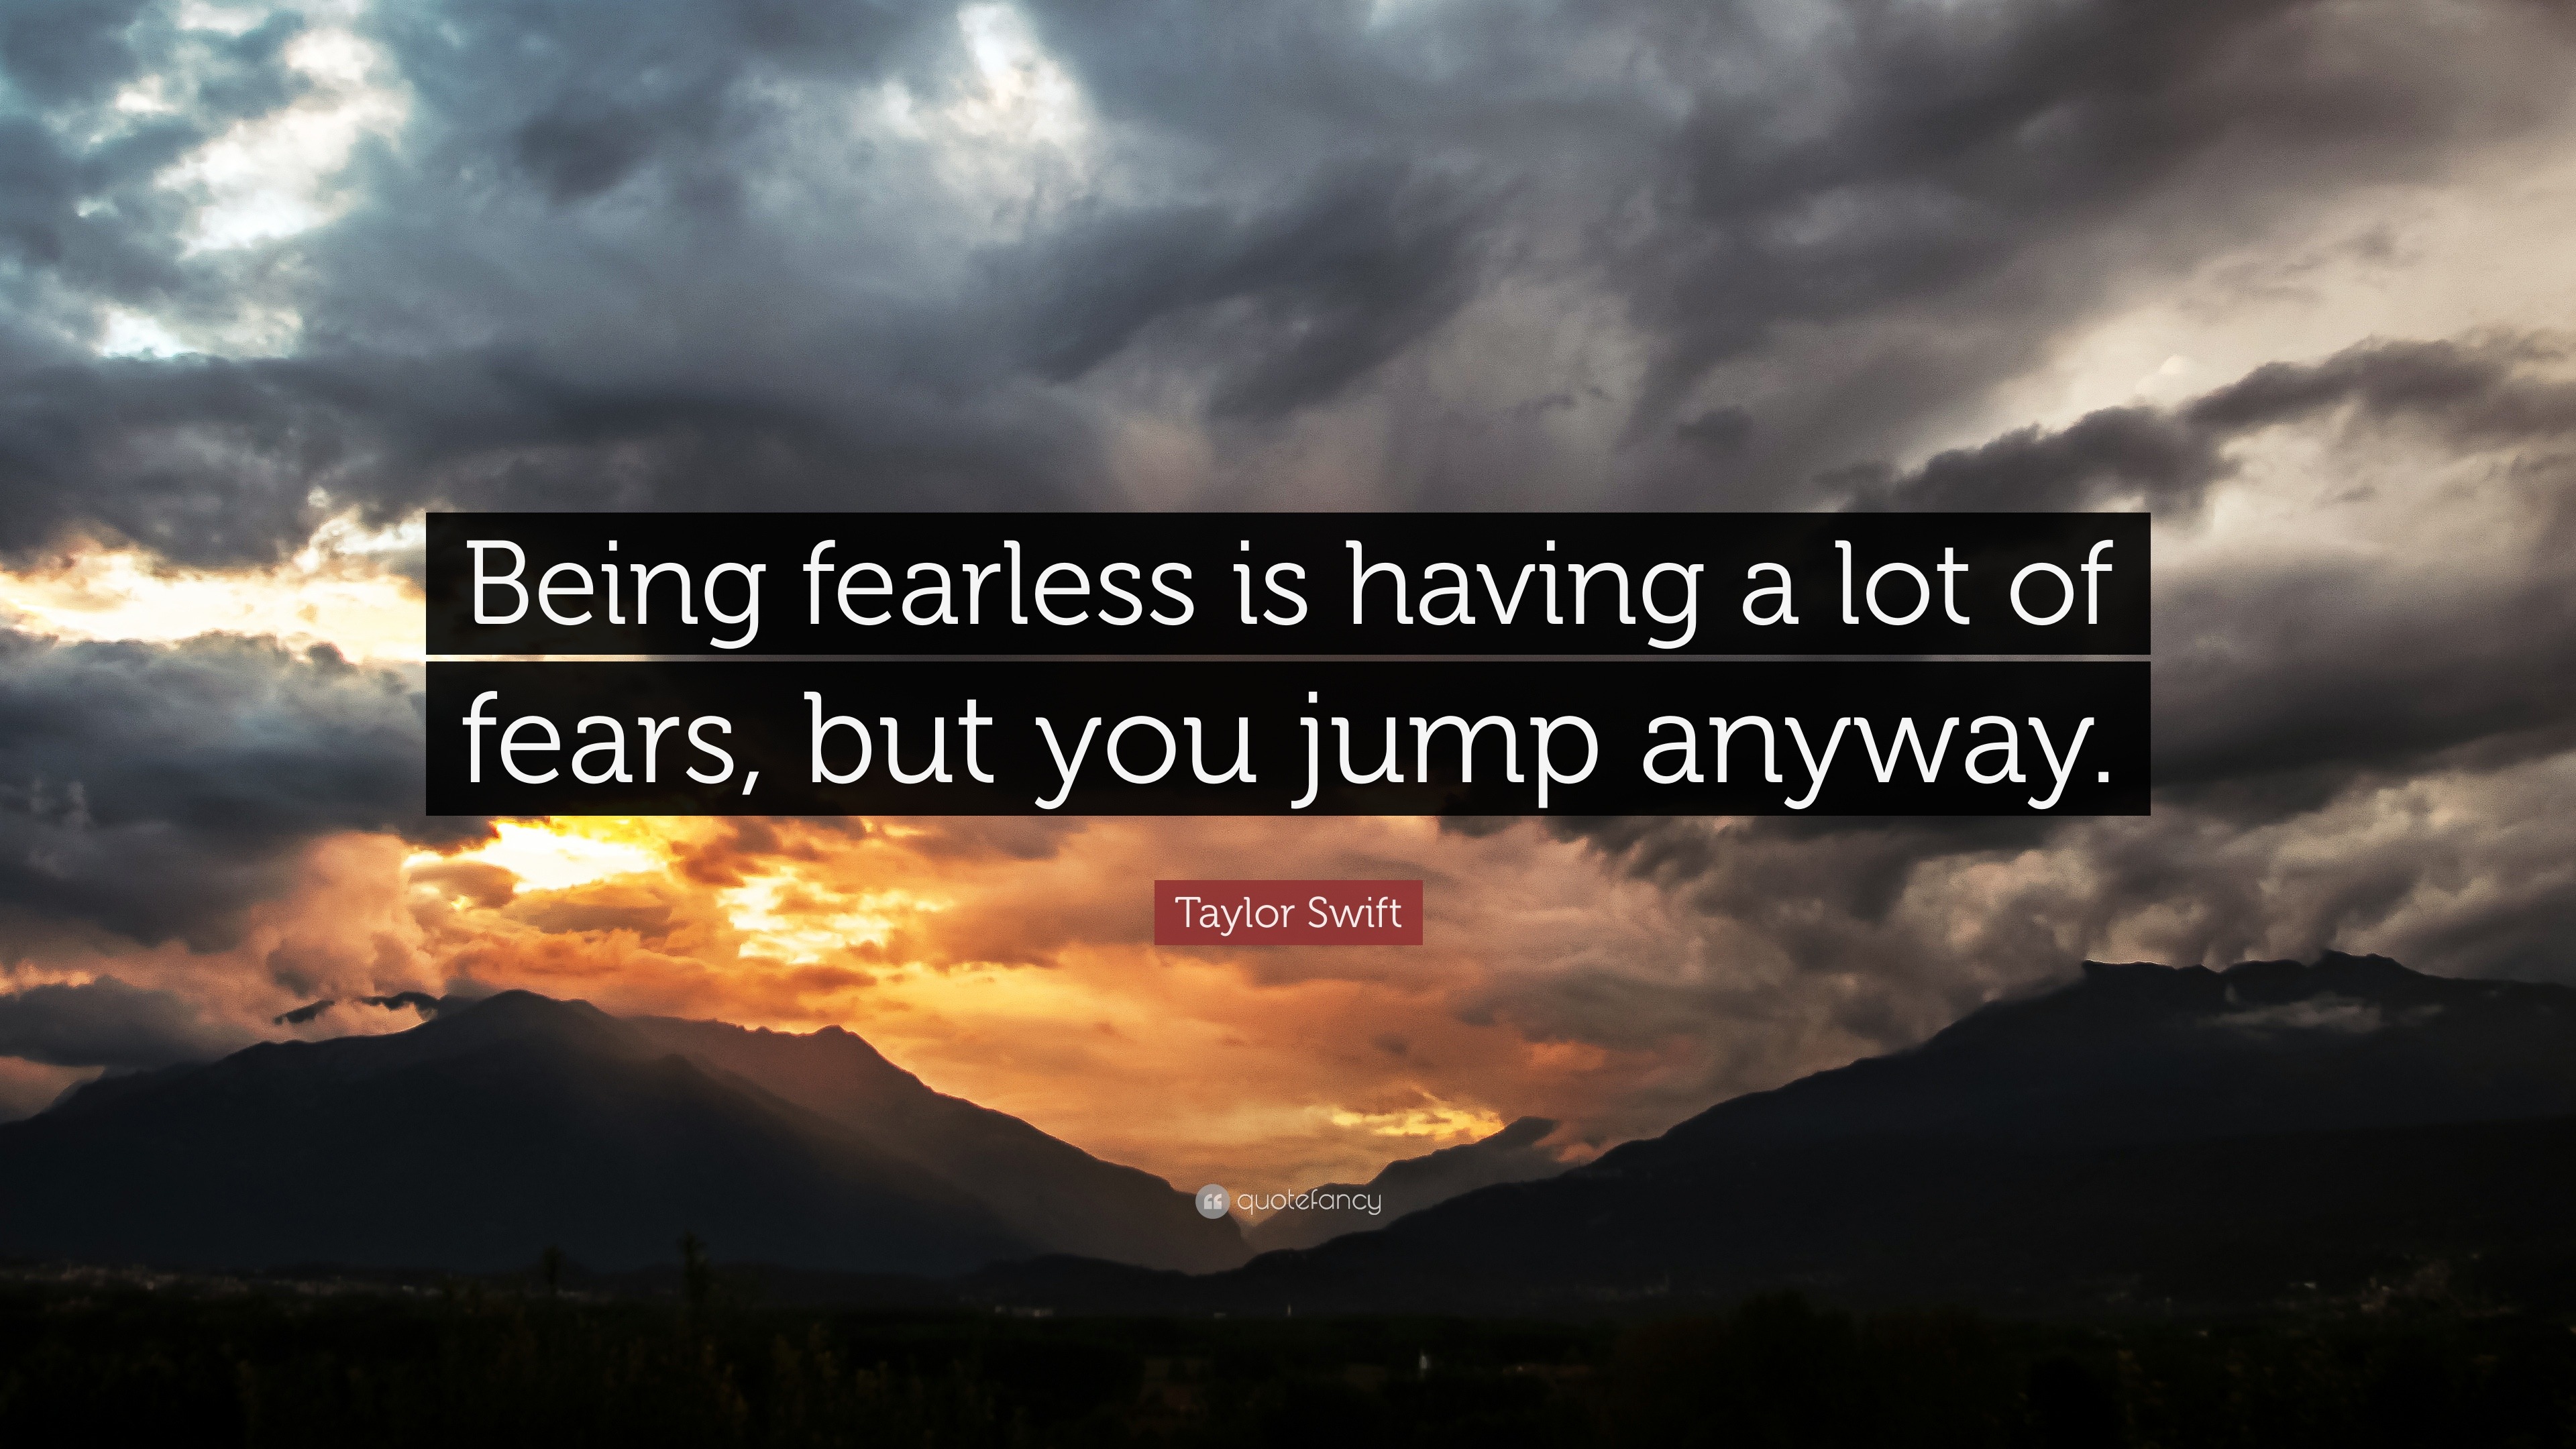 Taylor Swift Quote: “Being fearless is having a lot of fears, but you ...